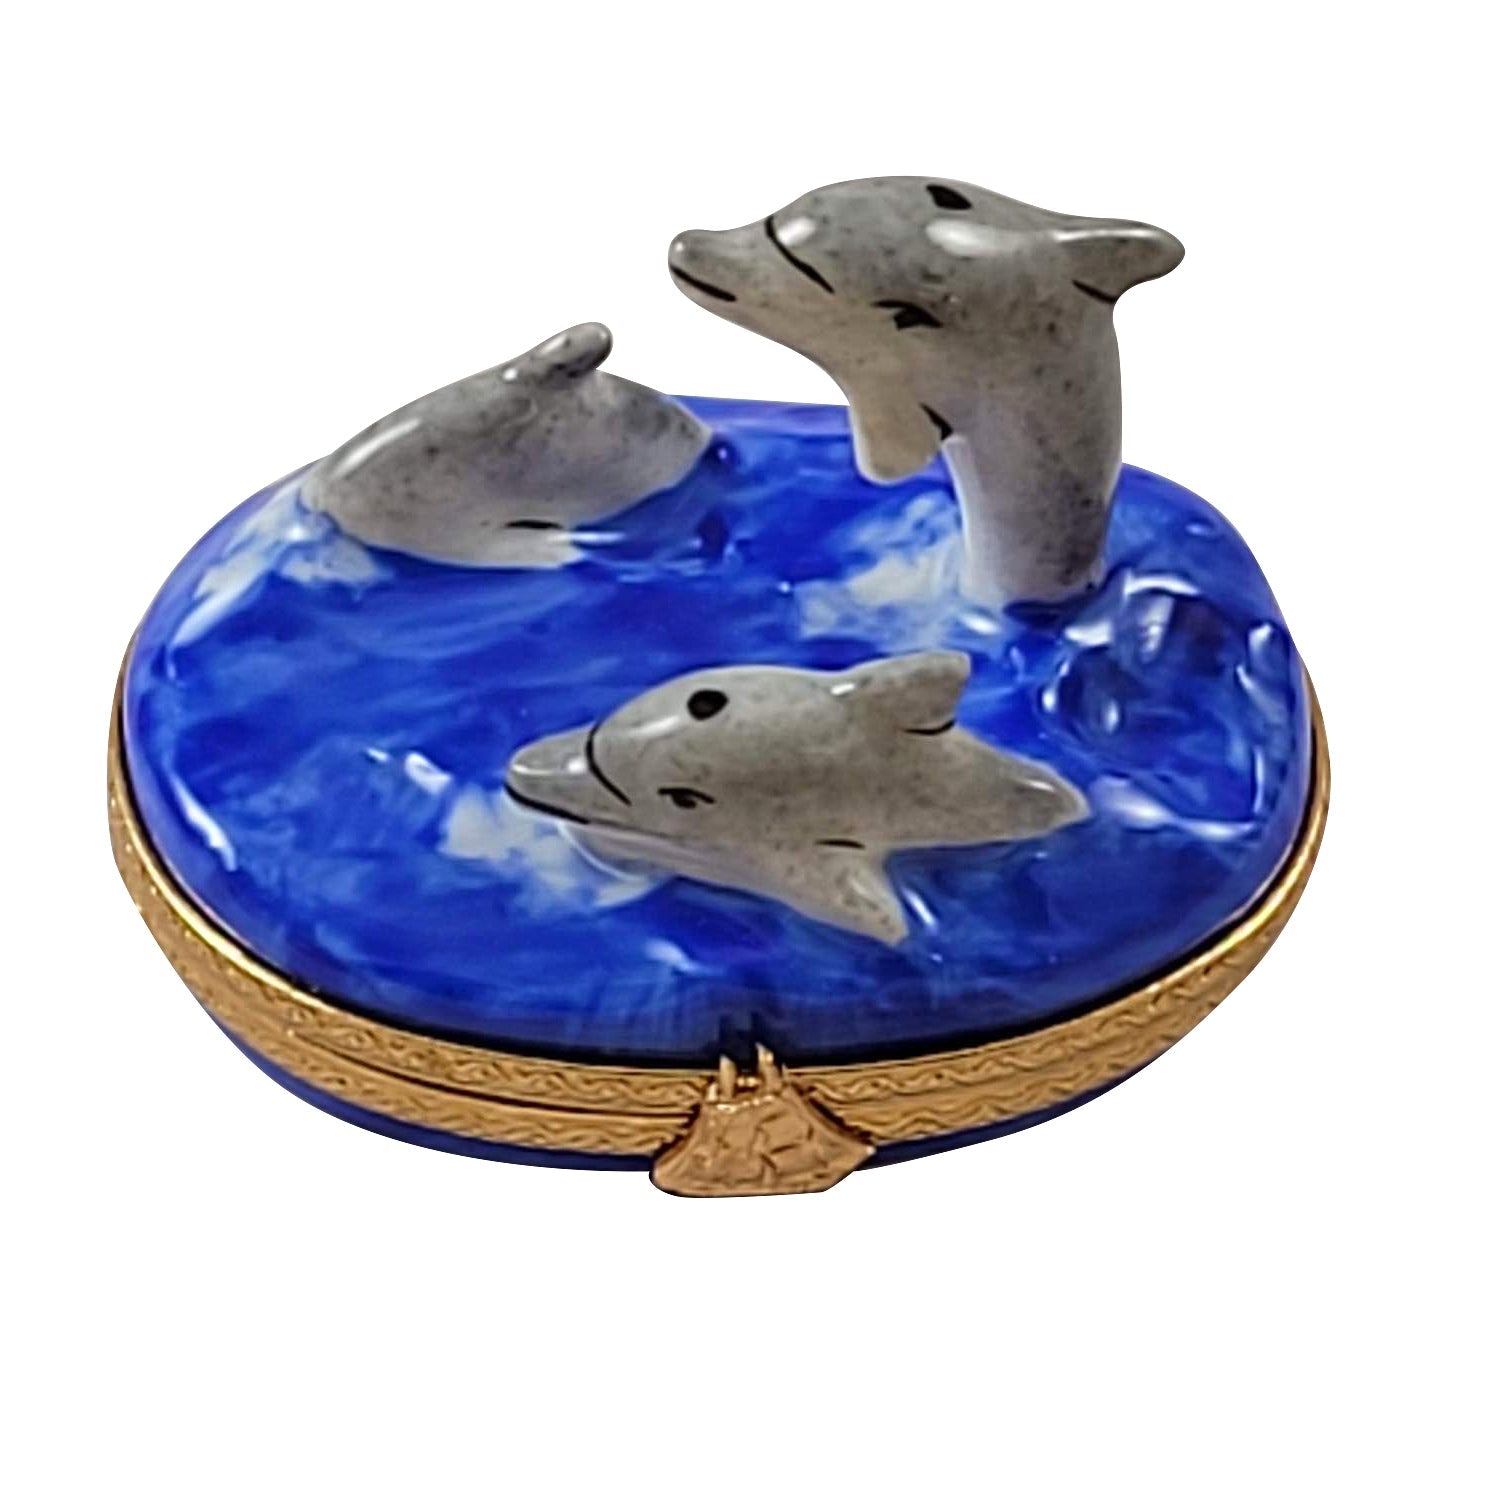 Three Dolphins Limoges Porcelain Box